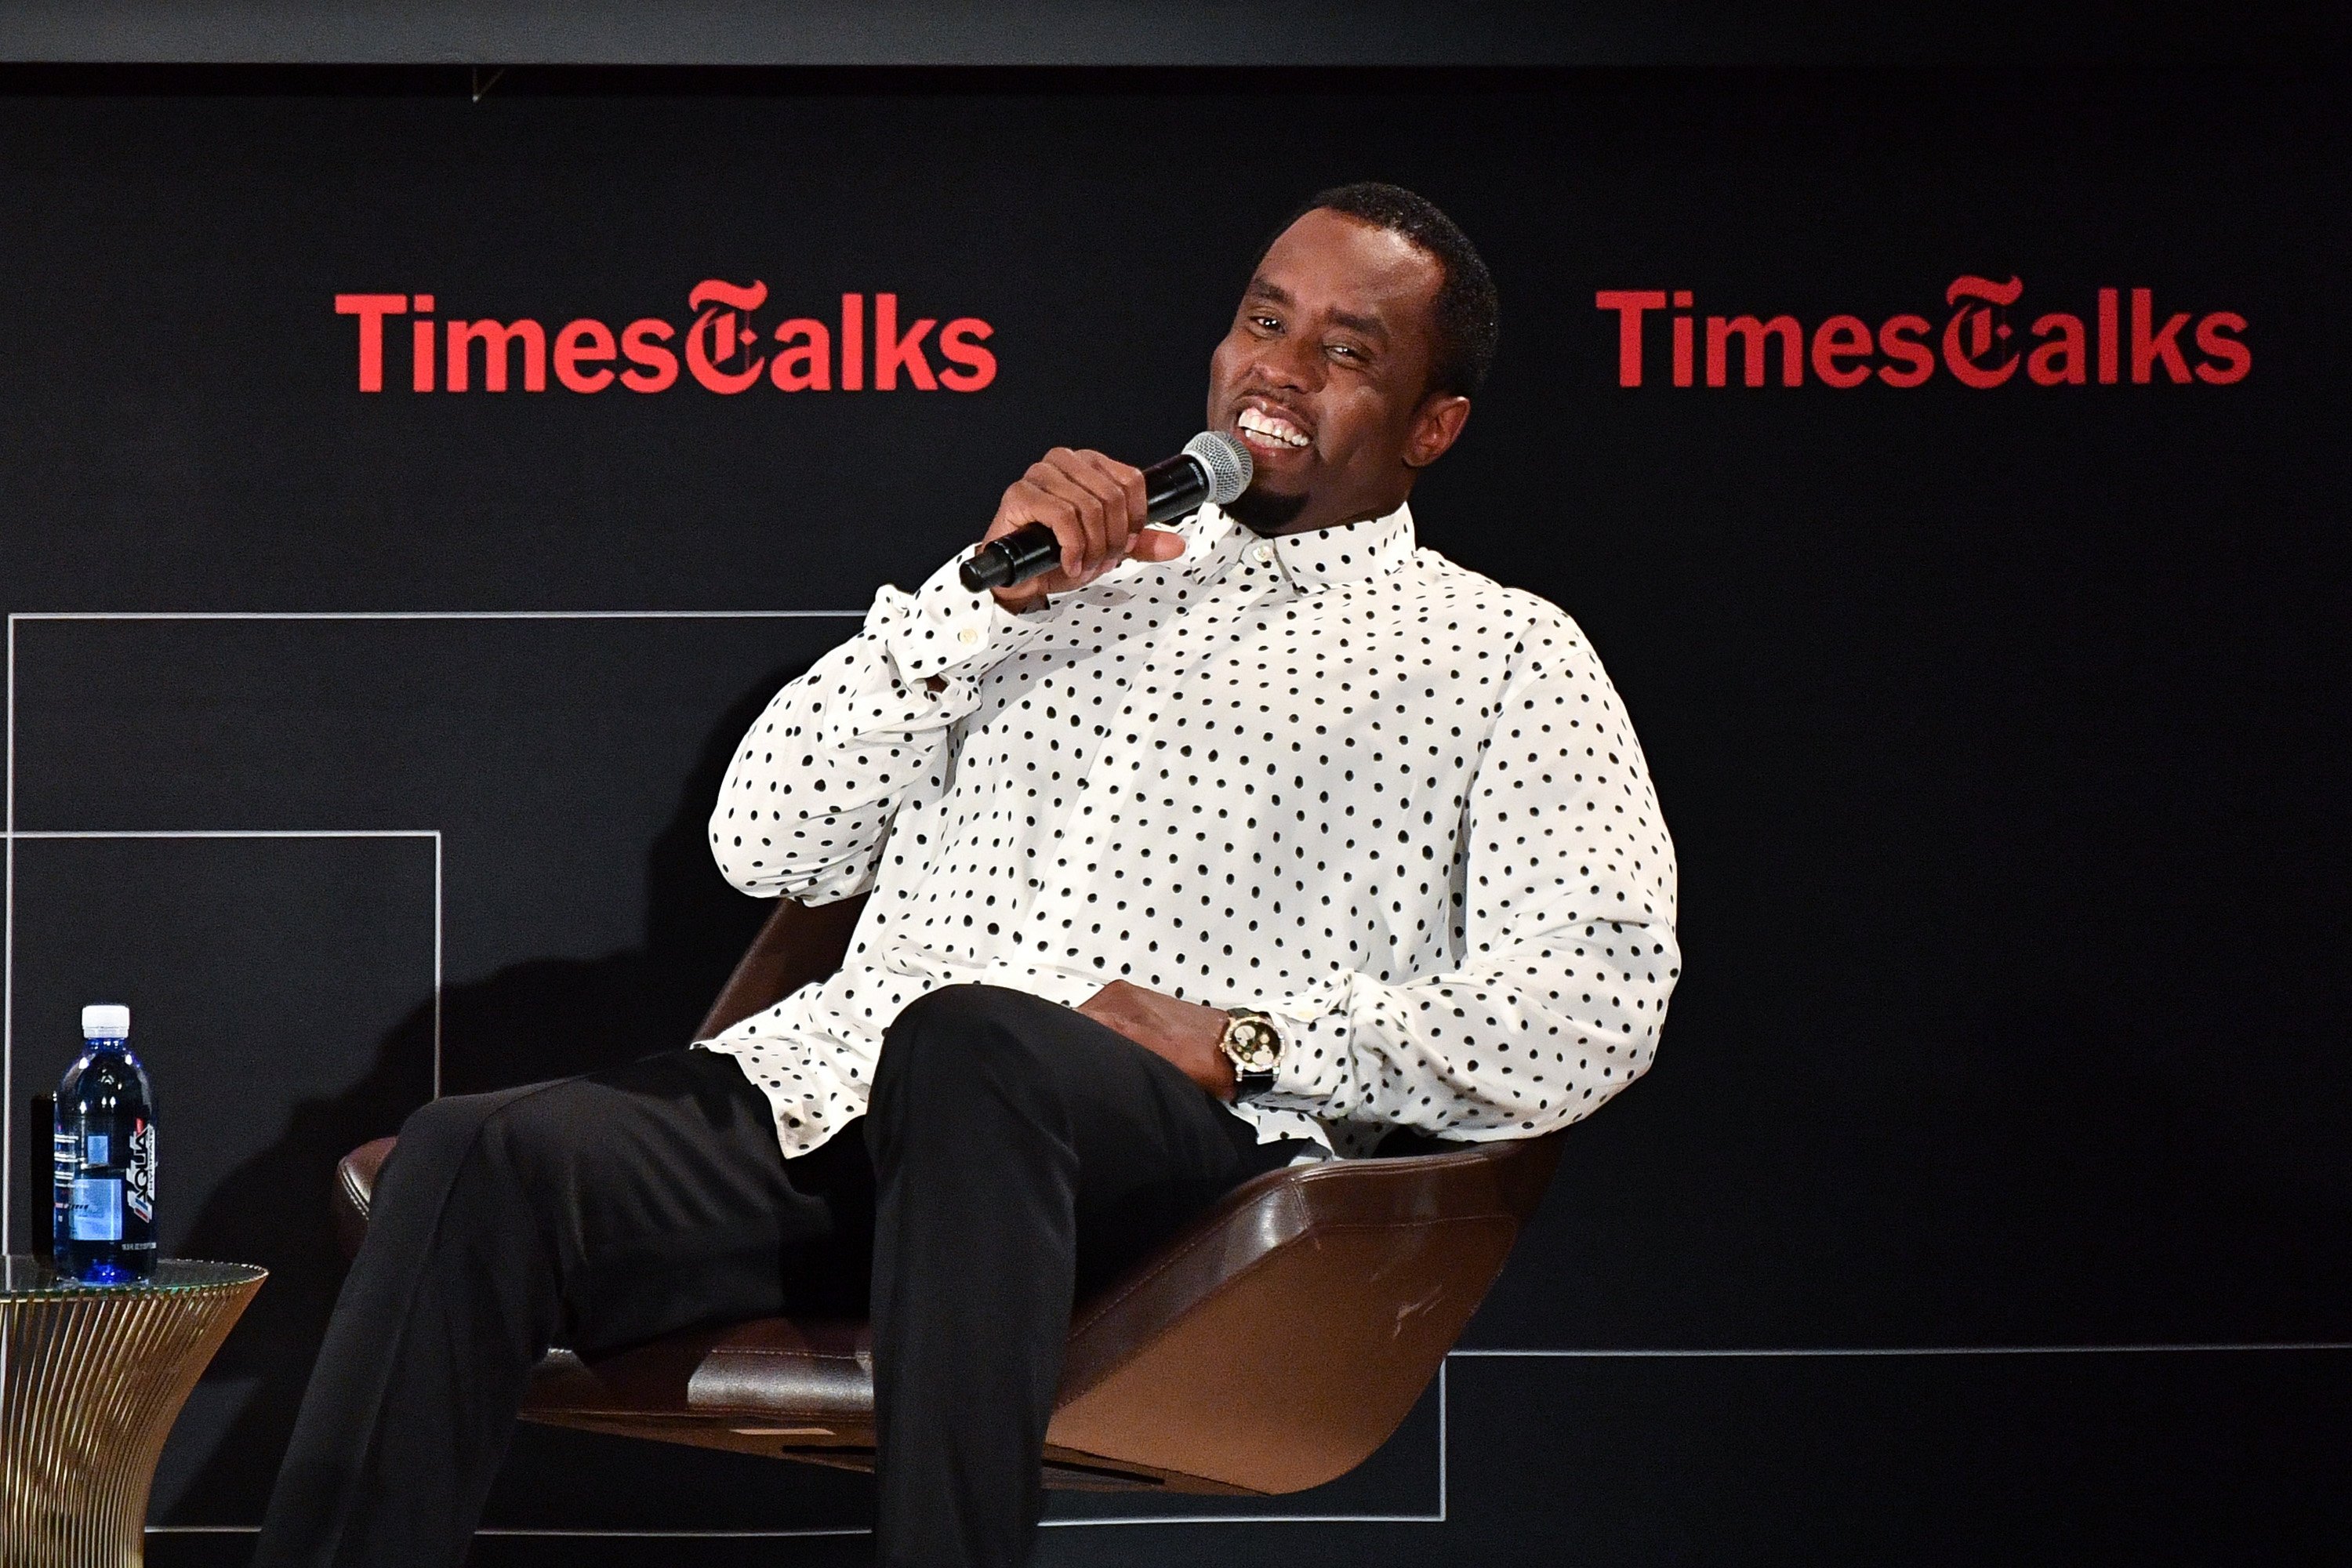 Sean "Diddy" Combs at TimesTalks Presents: An Evening with Sean "Diddy" Combs on Sept. 20, 2017 in New York City. | Photo: Getty Images